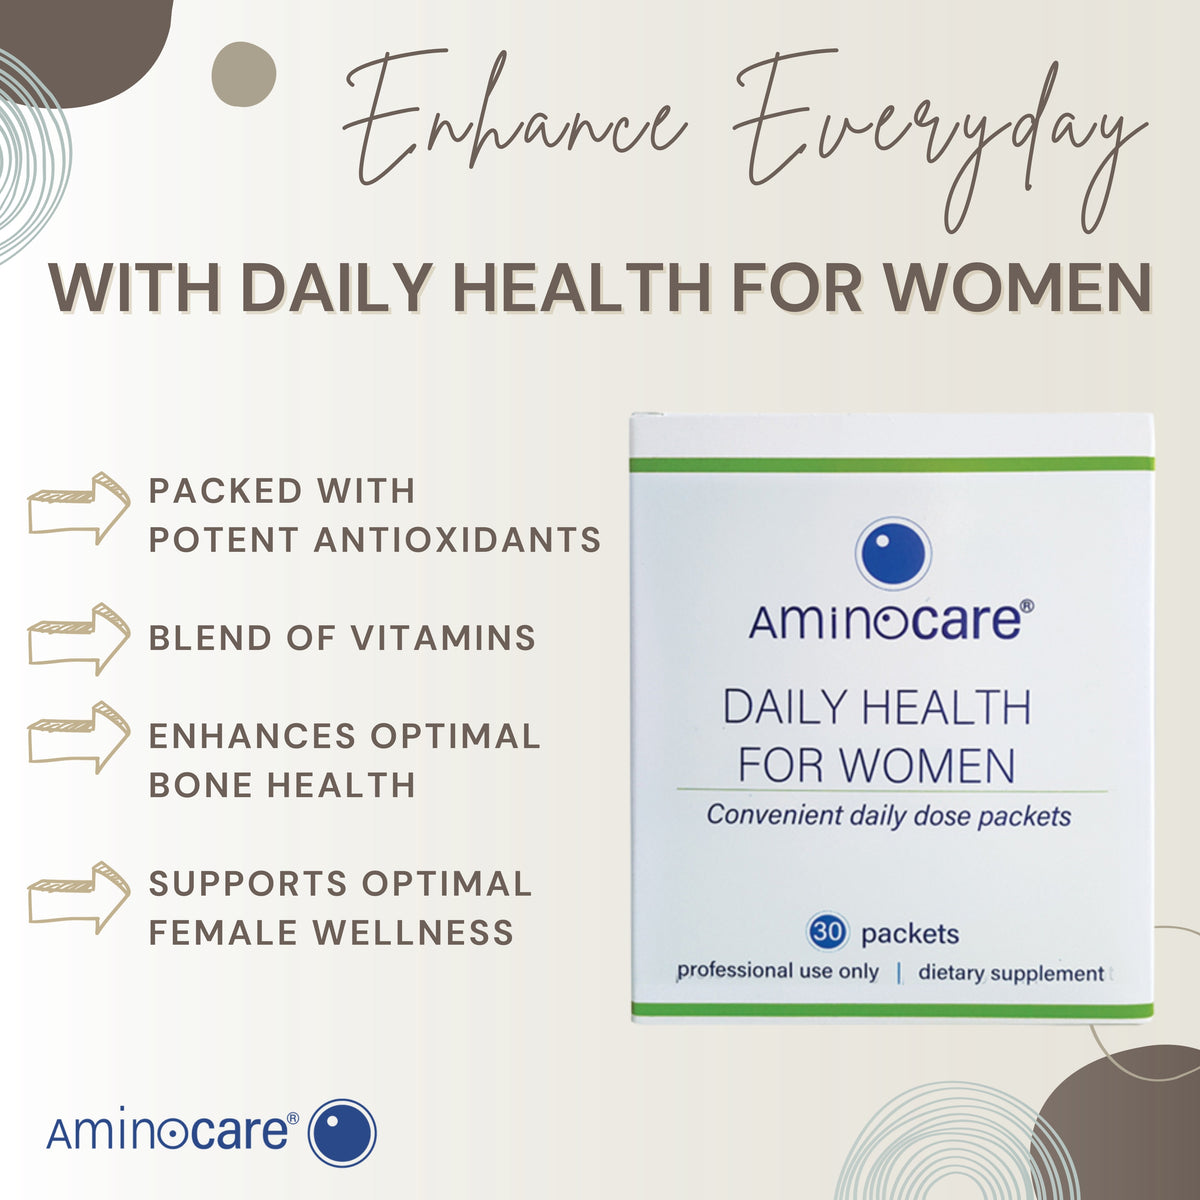 Enhance Holistic Well-Being with Daily Health for Women